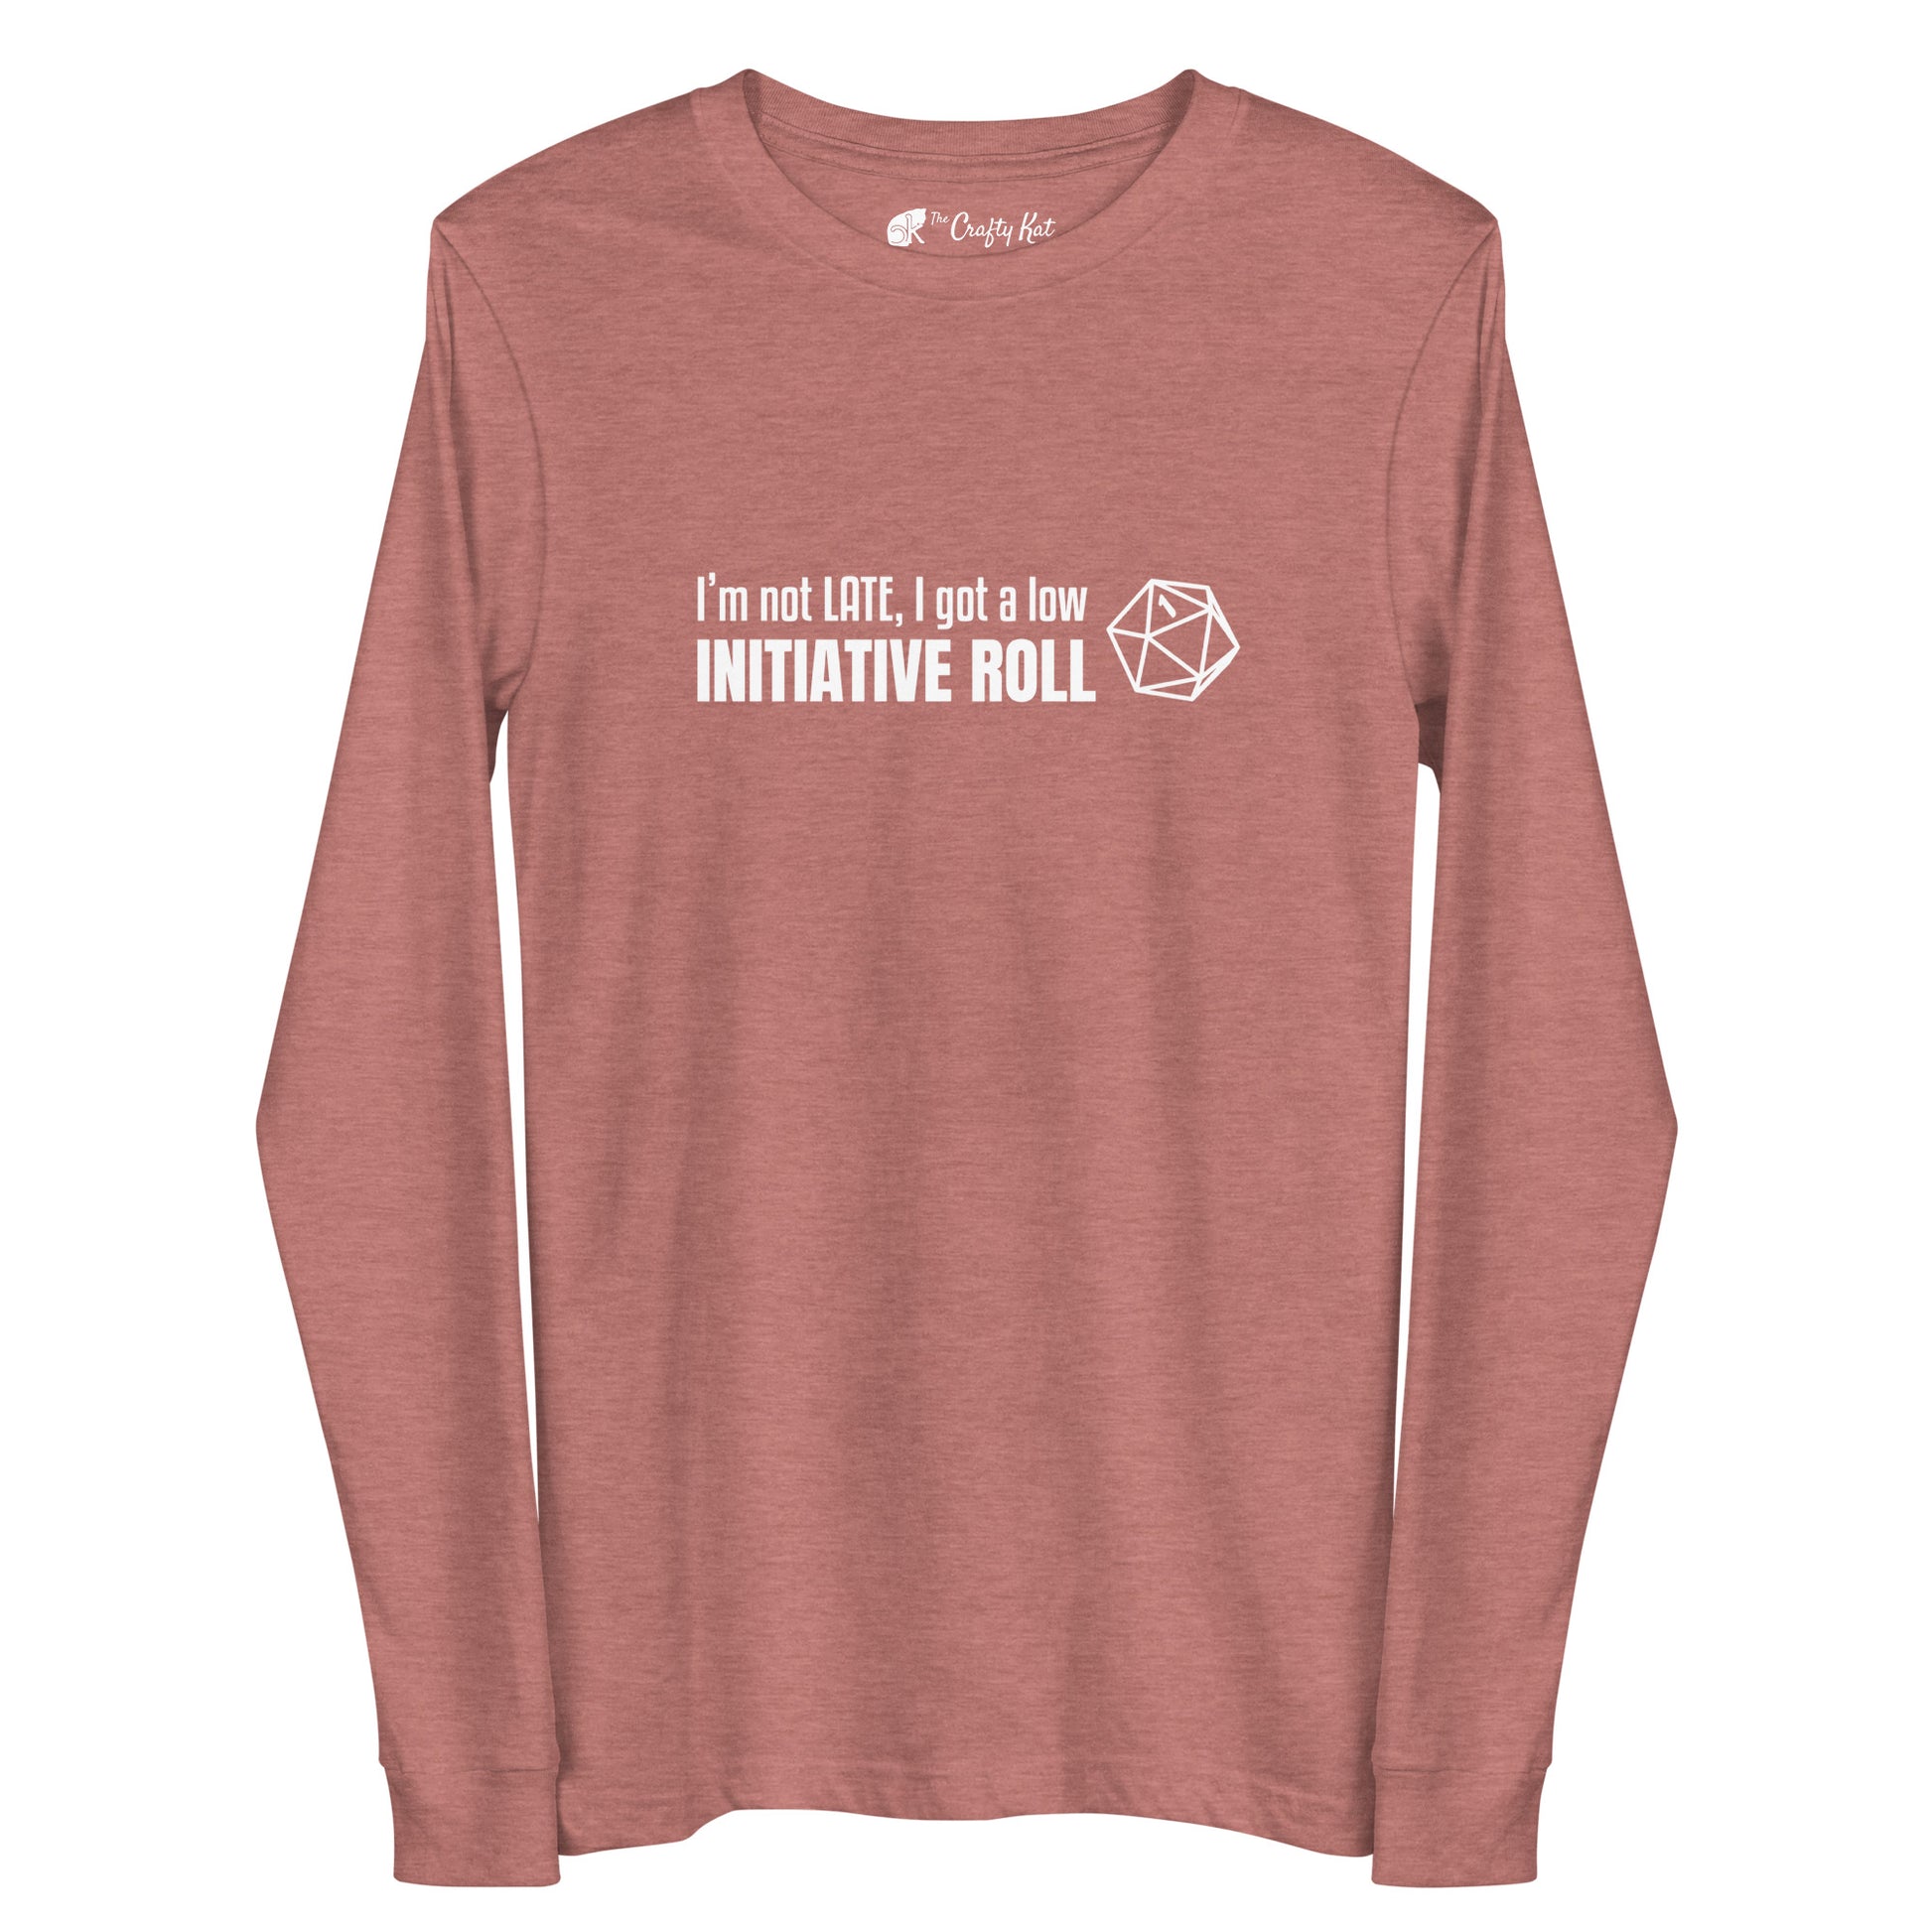 Heather Mauve long-sleeve tee with a graphic of a d20 (twenty-sided die) showing a roll of "1" and text: "I'm not LATE, I got a low INITIATIVE ROLL"